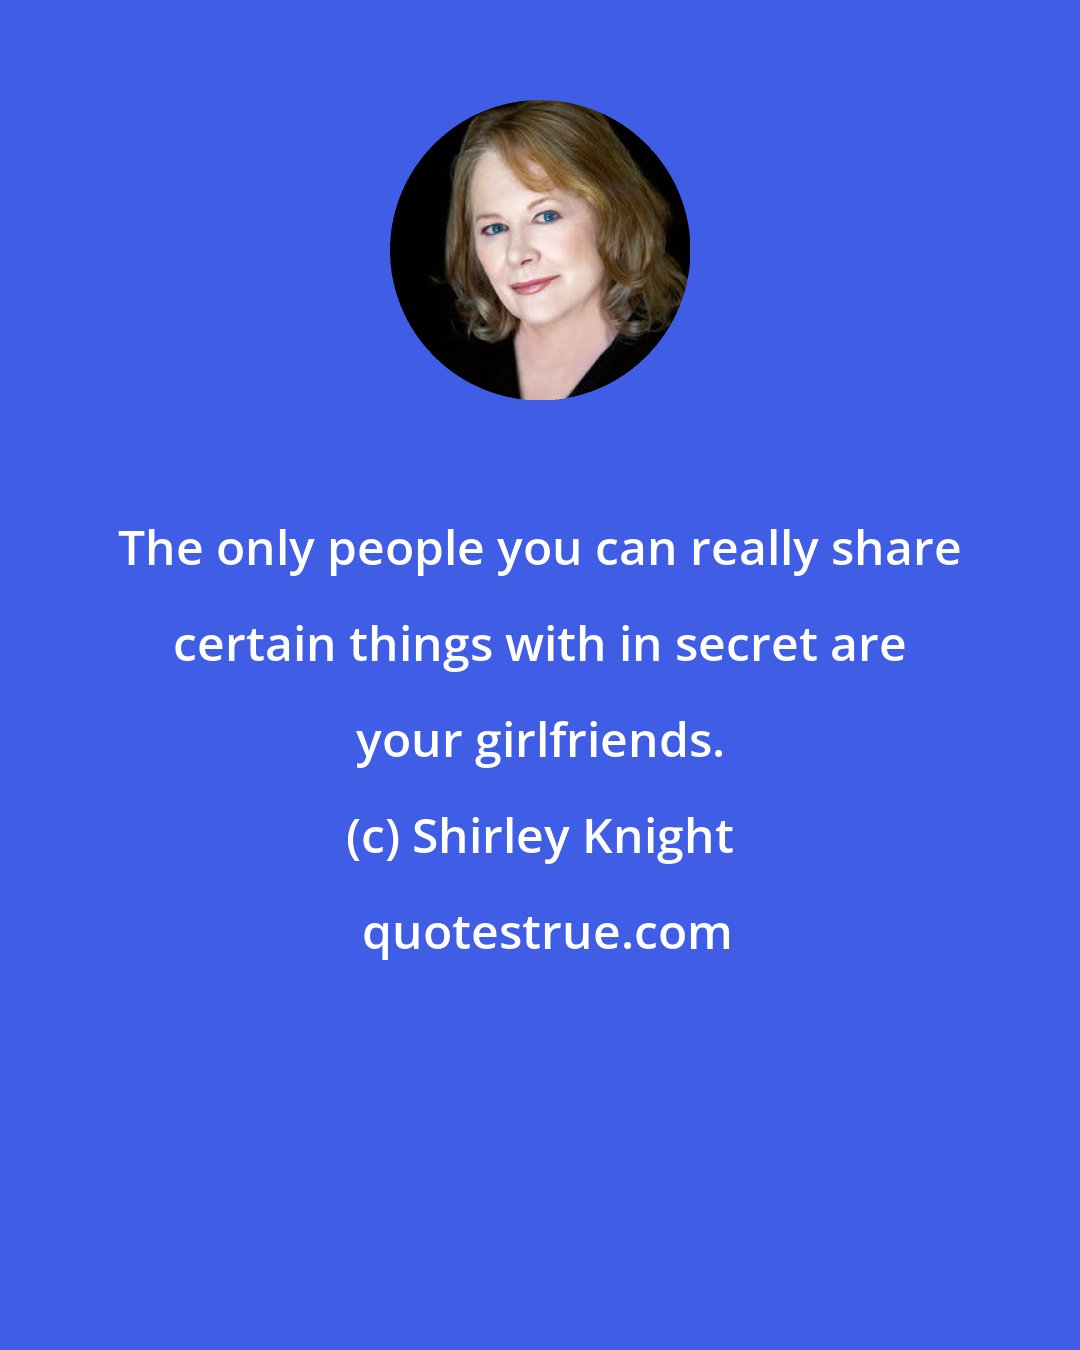 Shirley Knight: The only people you can really share certain things with in secret are your girlfriends.